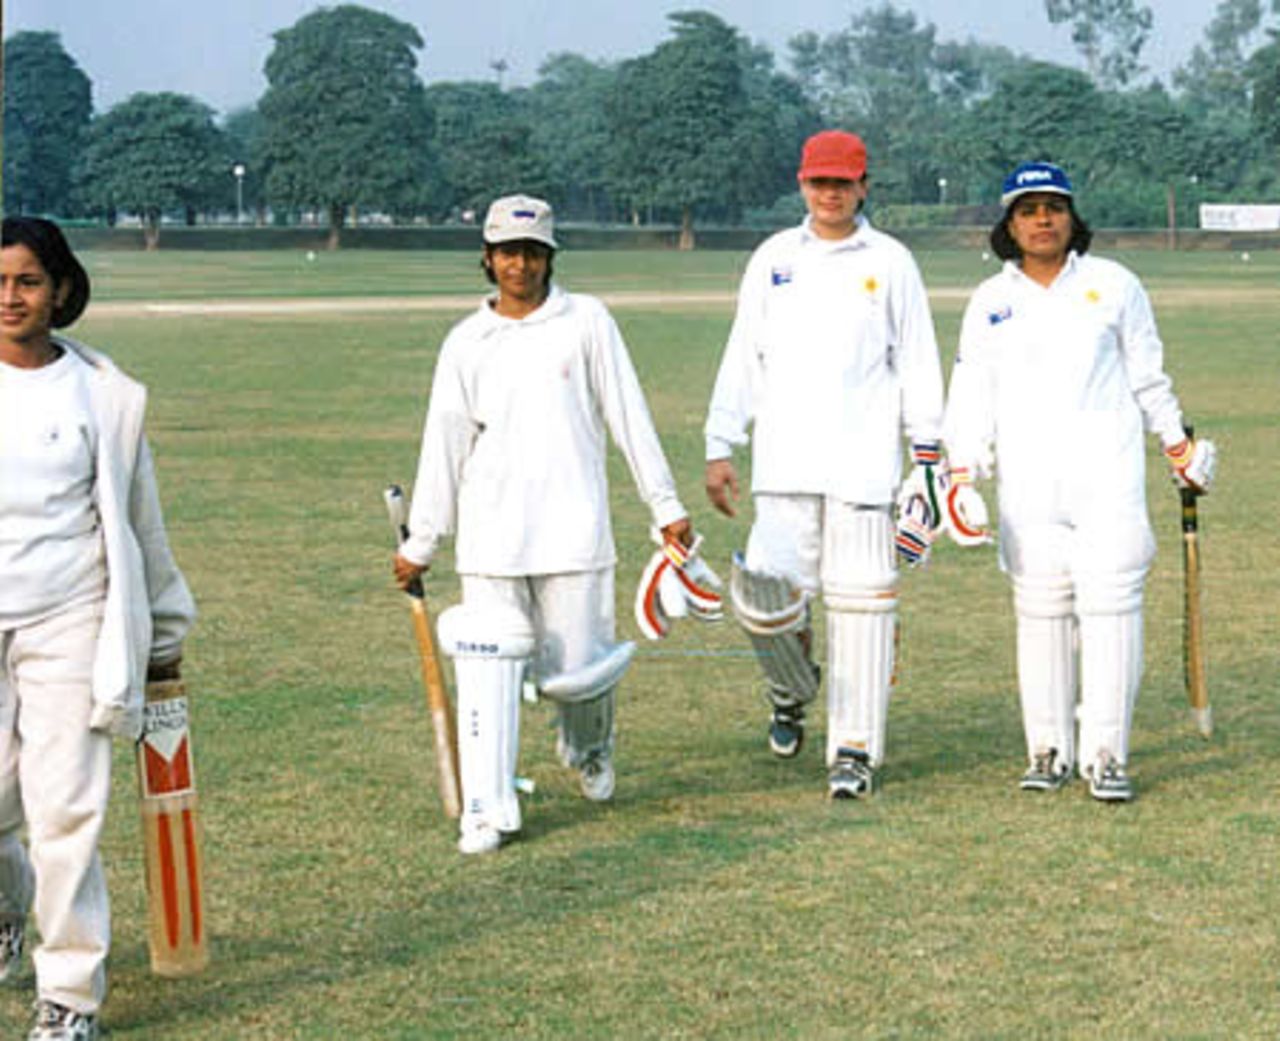 Raeesa Ilyas (captain) and Taskeen Qadir (with runner) the not out pair, NQWCT-2000, 20-25 Nov 2000, Race Course Park, Lahore